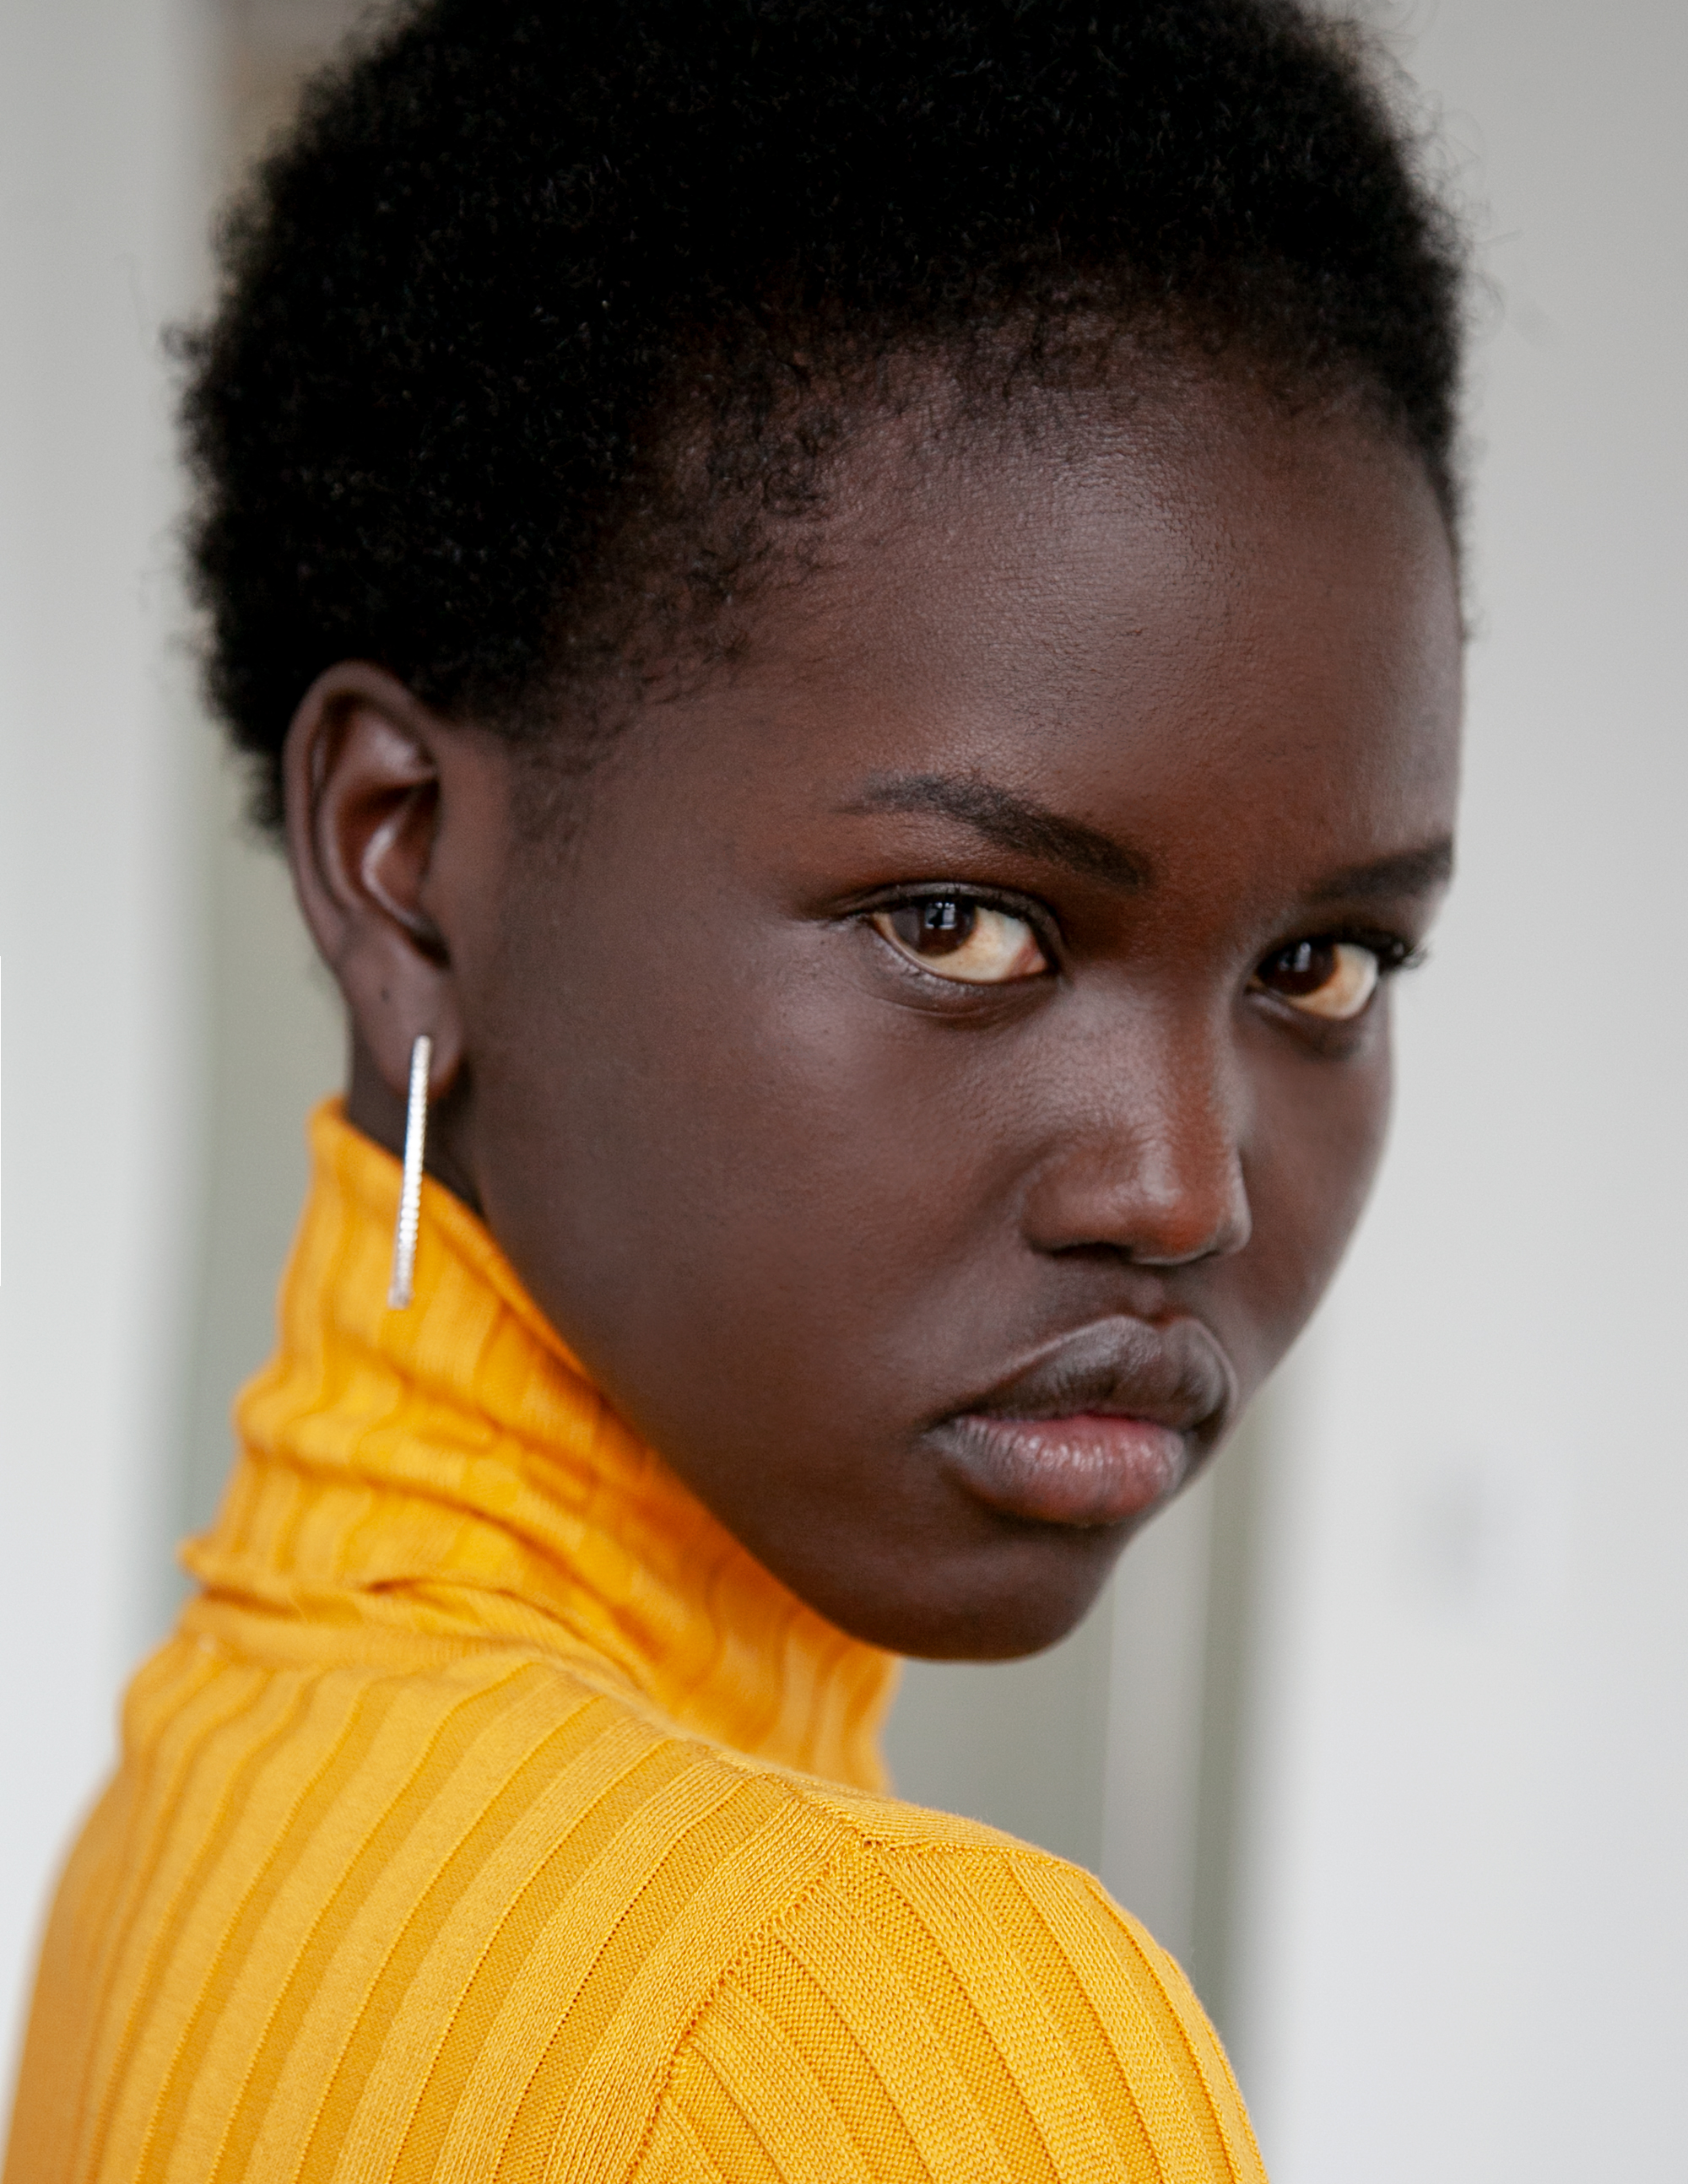 Former refugee and now supermodel Adut Akech: 'The word family has evo...